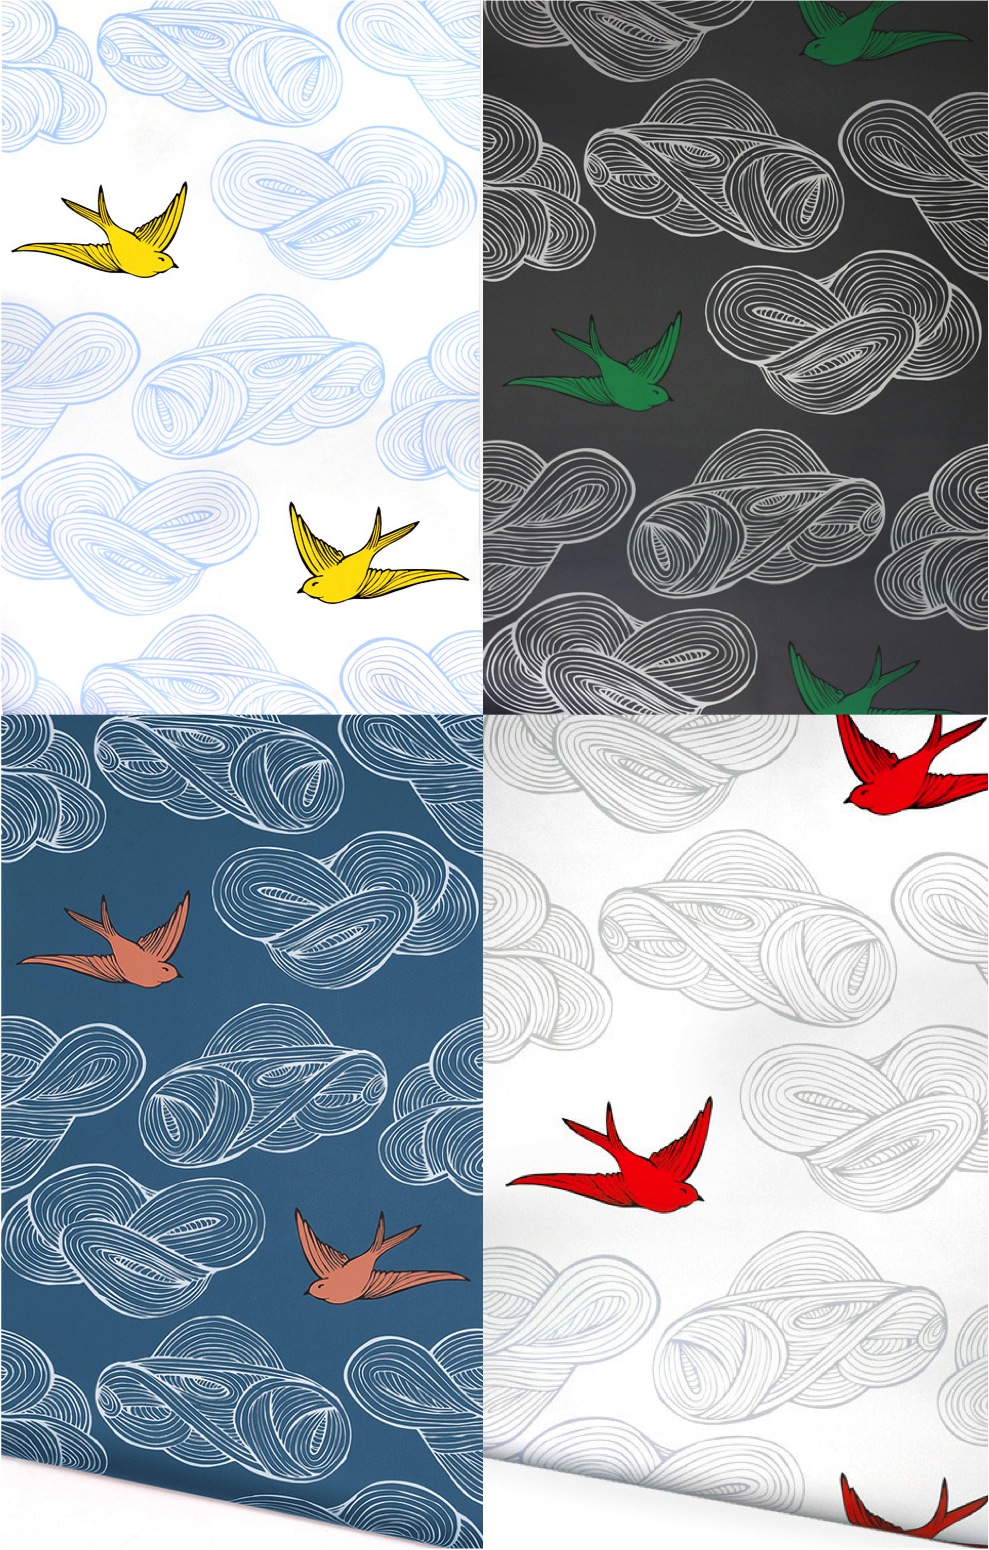 Ebabee Likes Bold And Bright Bird Wallpaper For A Nursery